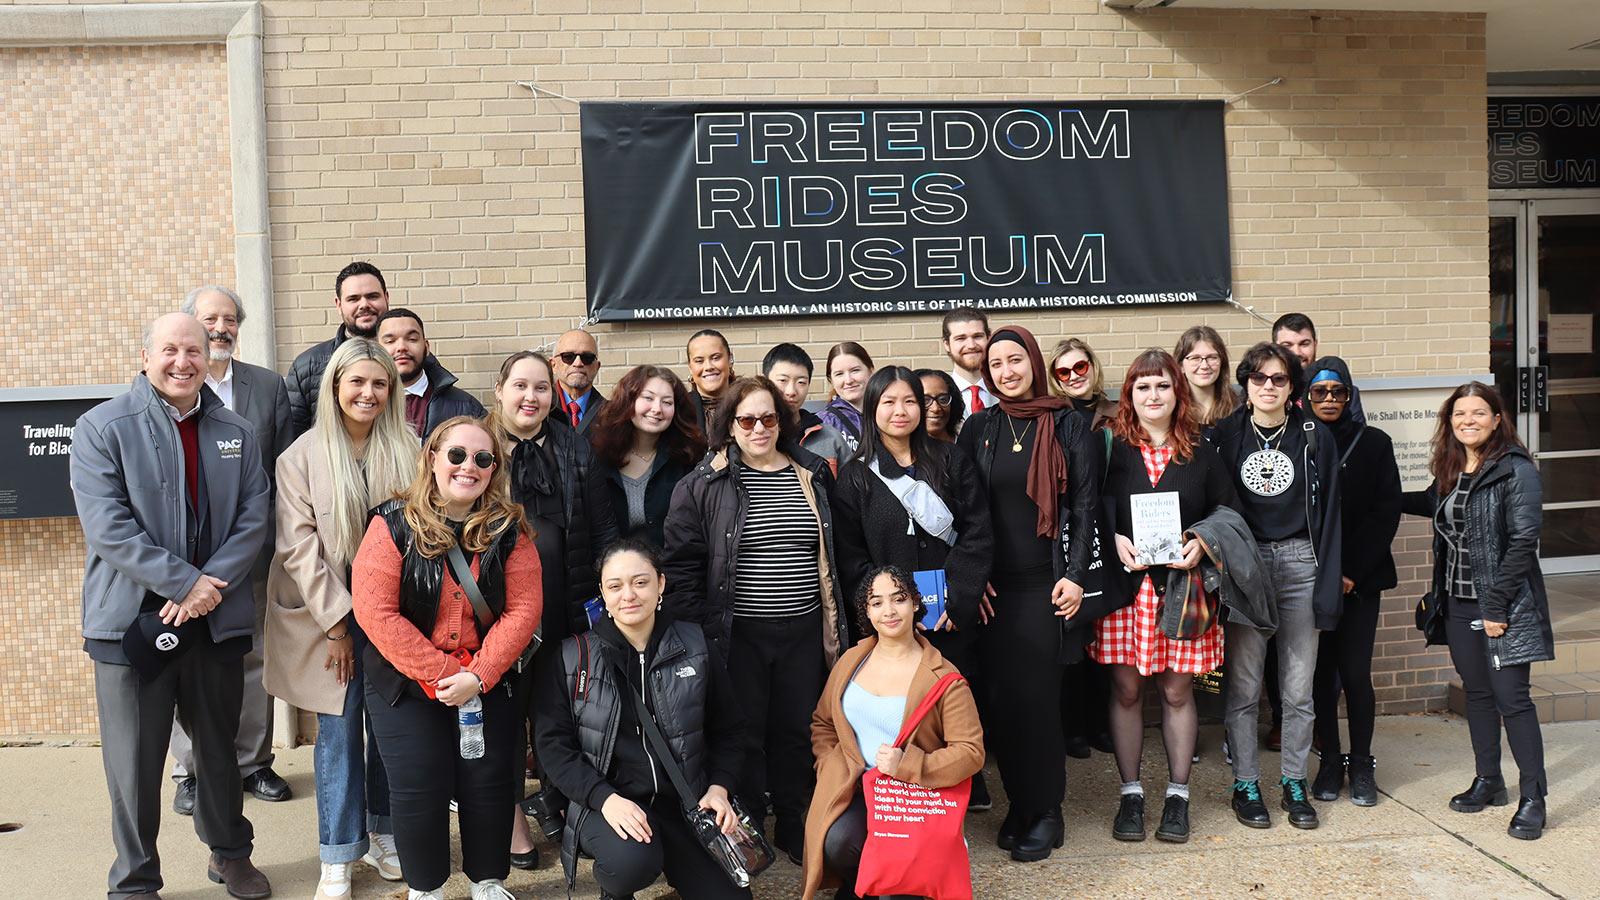 Pace students and faculty at the Freedom Rights Museum